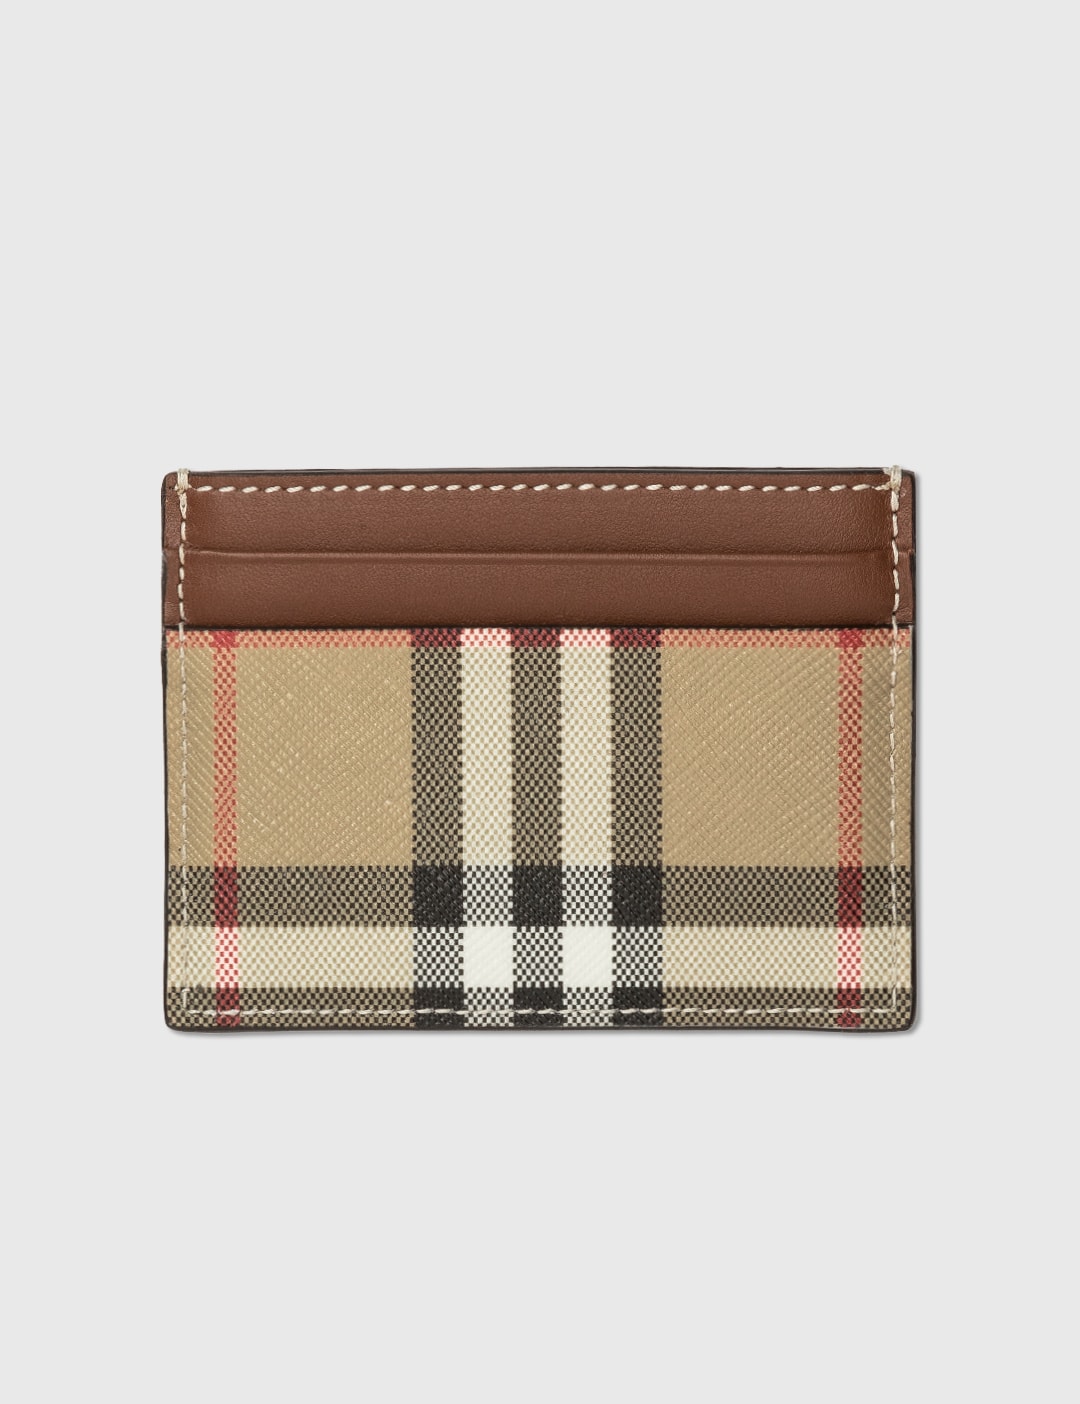 Vintage Check and Leather Card Case Placeholder Image